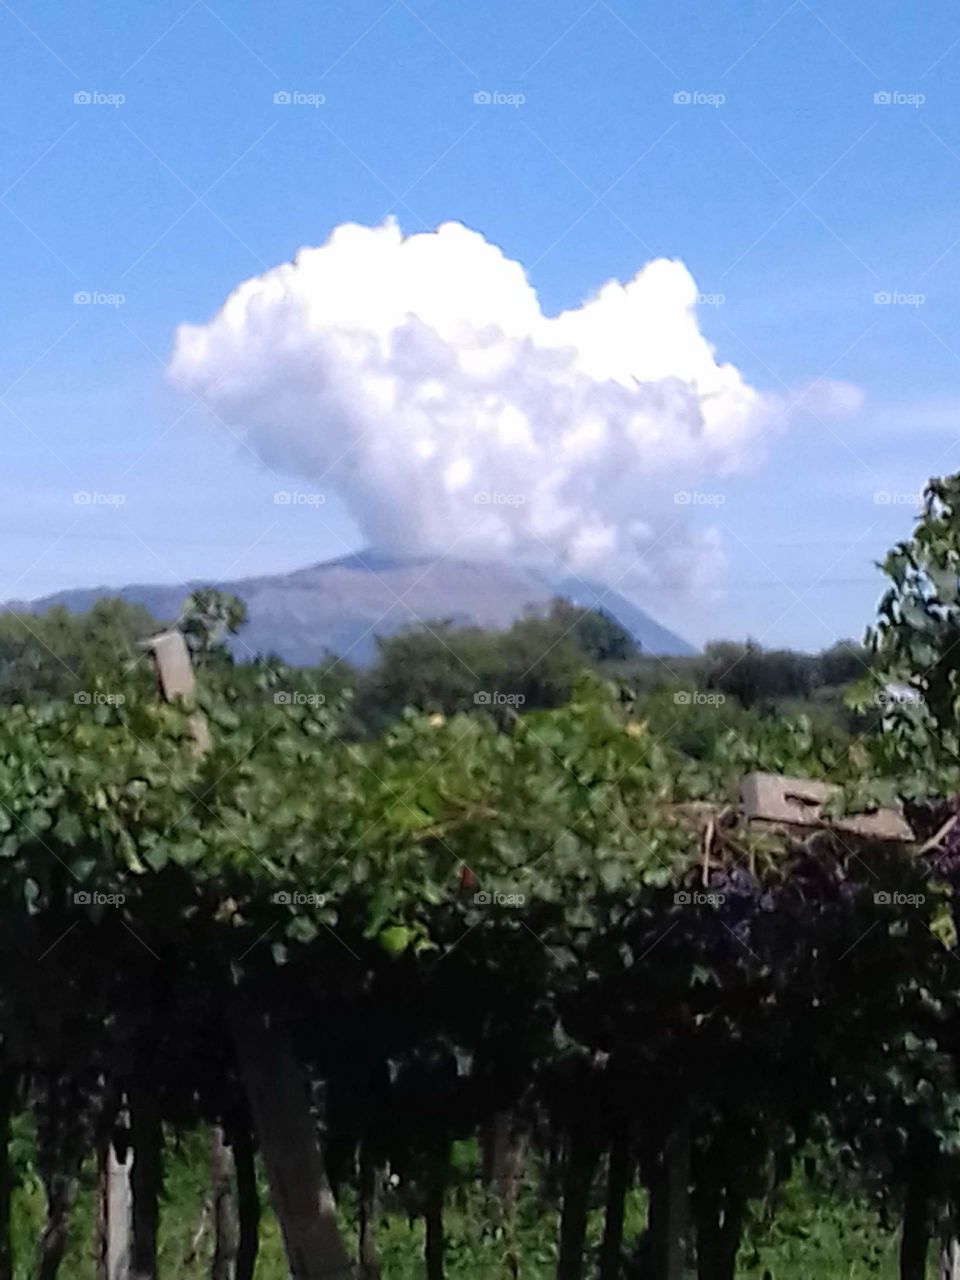 volcano? no...just clouds on the mountain